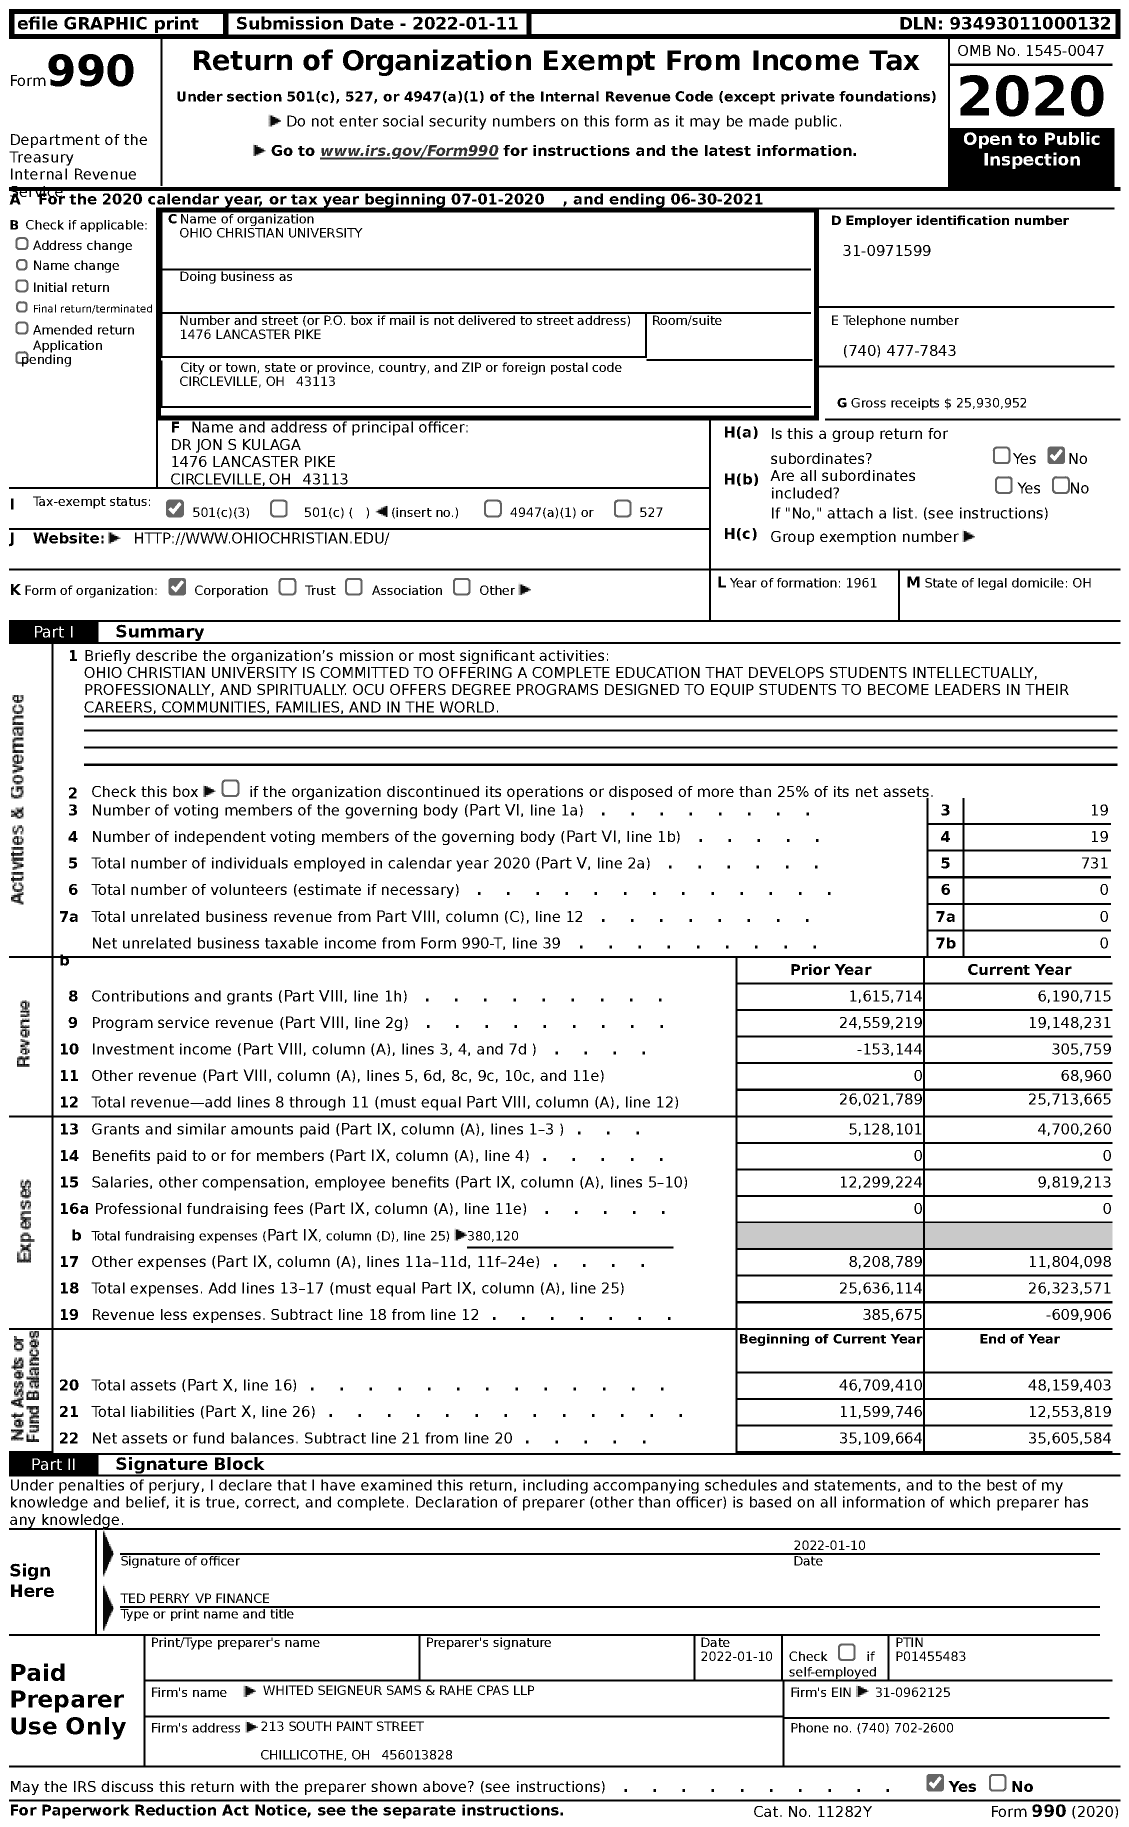 Image of first page of 2020 Form 990 for Ohio Christian University (OCU)